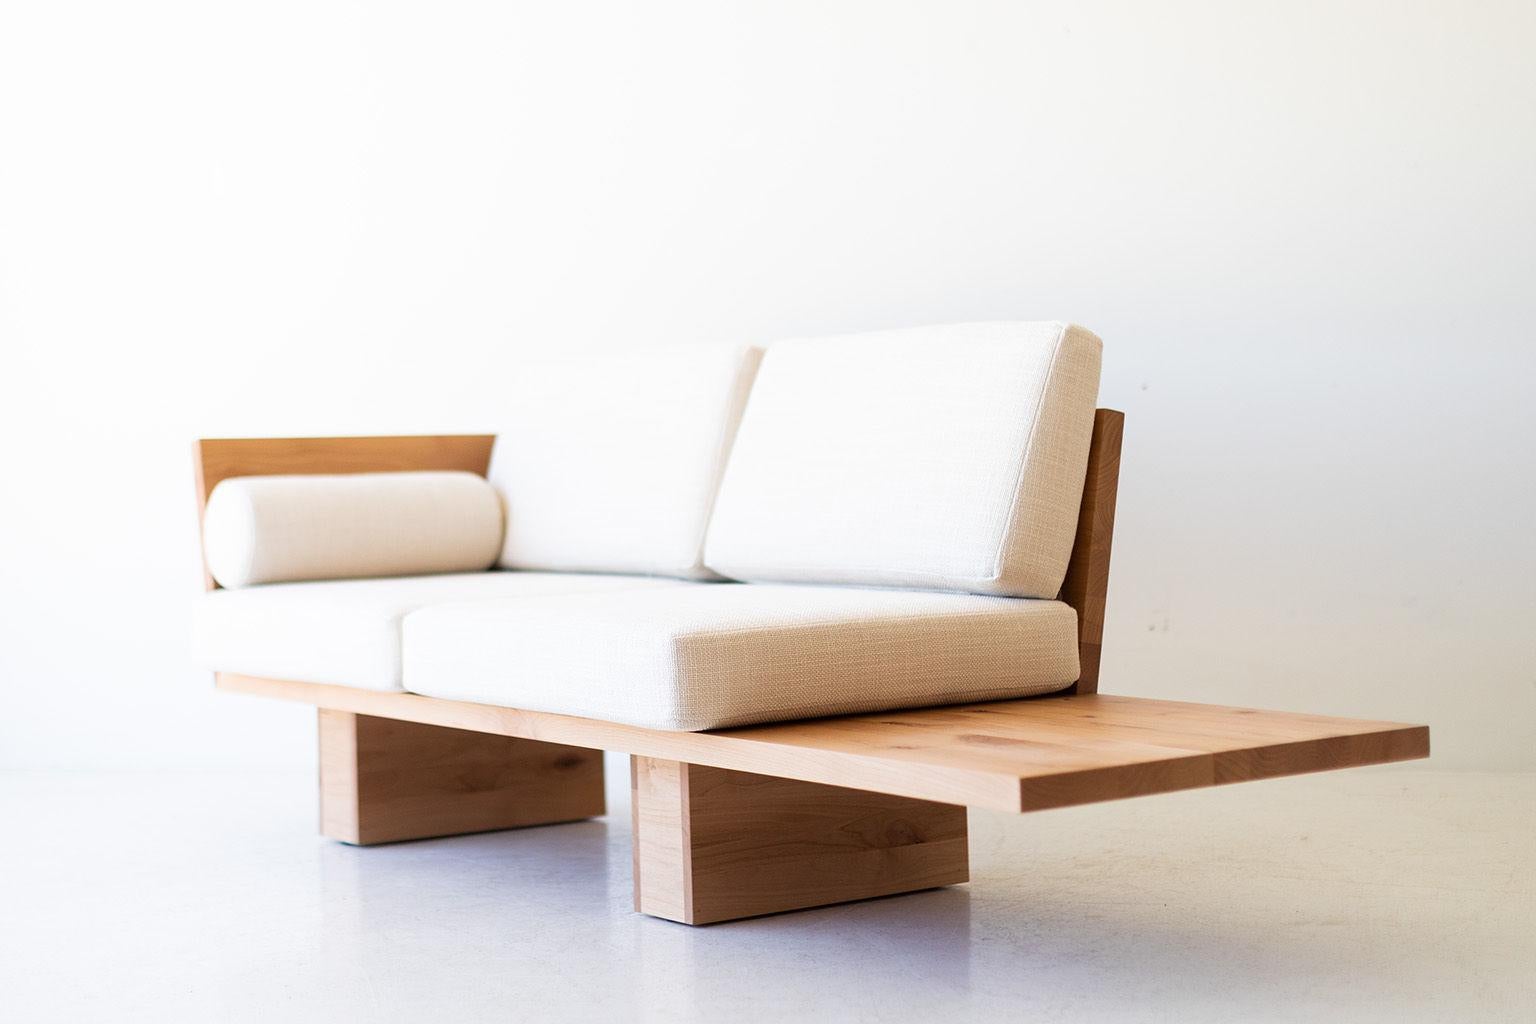 This Suelo modern loveseat is beautifully constructed from solid wood in Ohio, USA. The sofa's silhouette is simple, modern, and sleek with comfortable back and seat cushions. This is the perfect loveseat for any space, indoor or outdoor. The Suelo